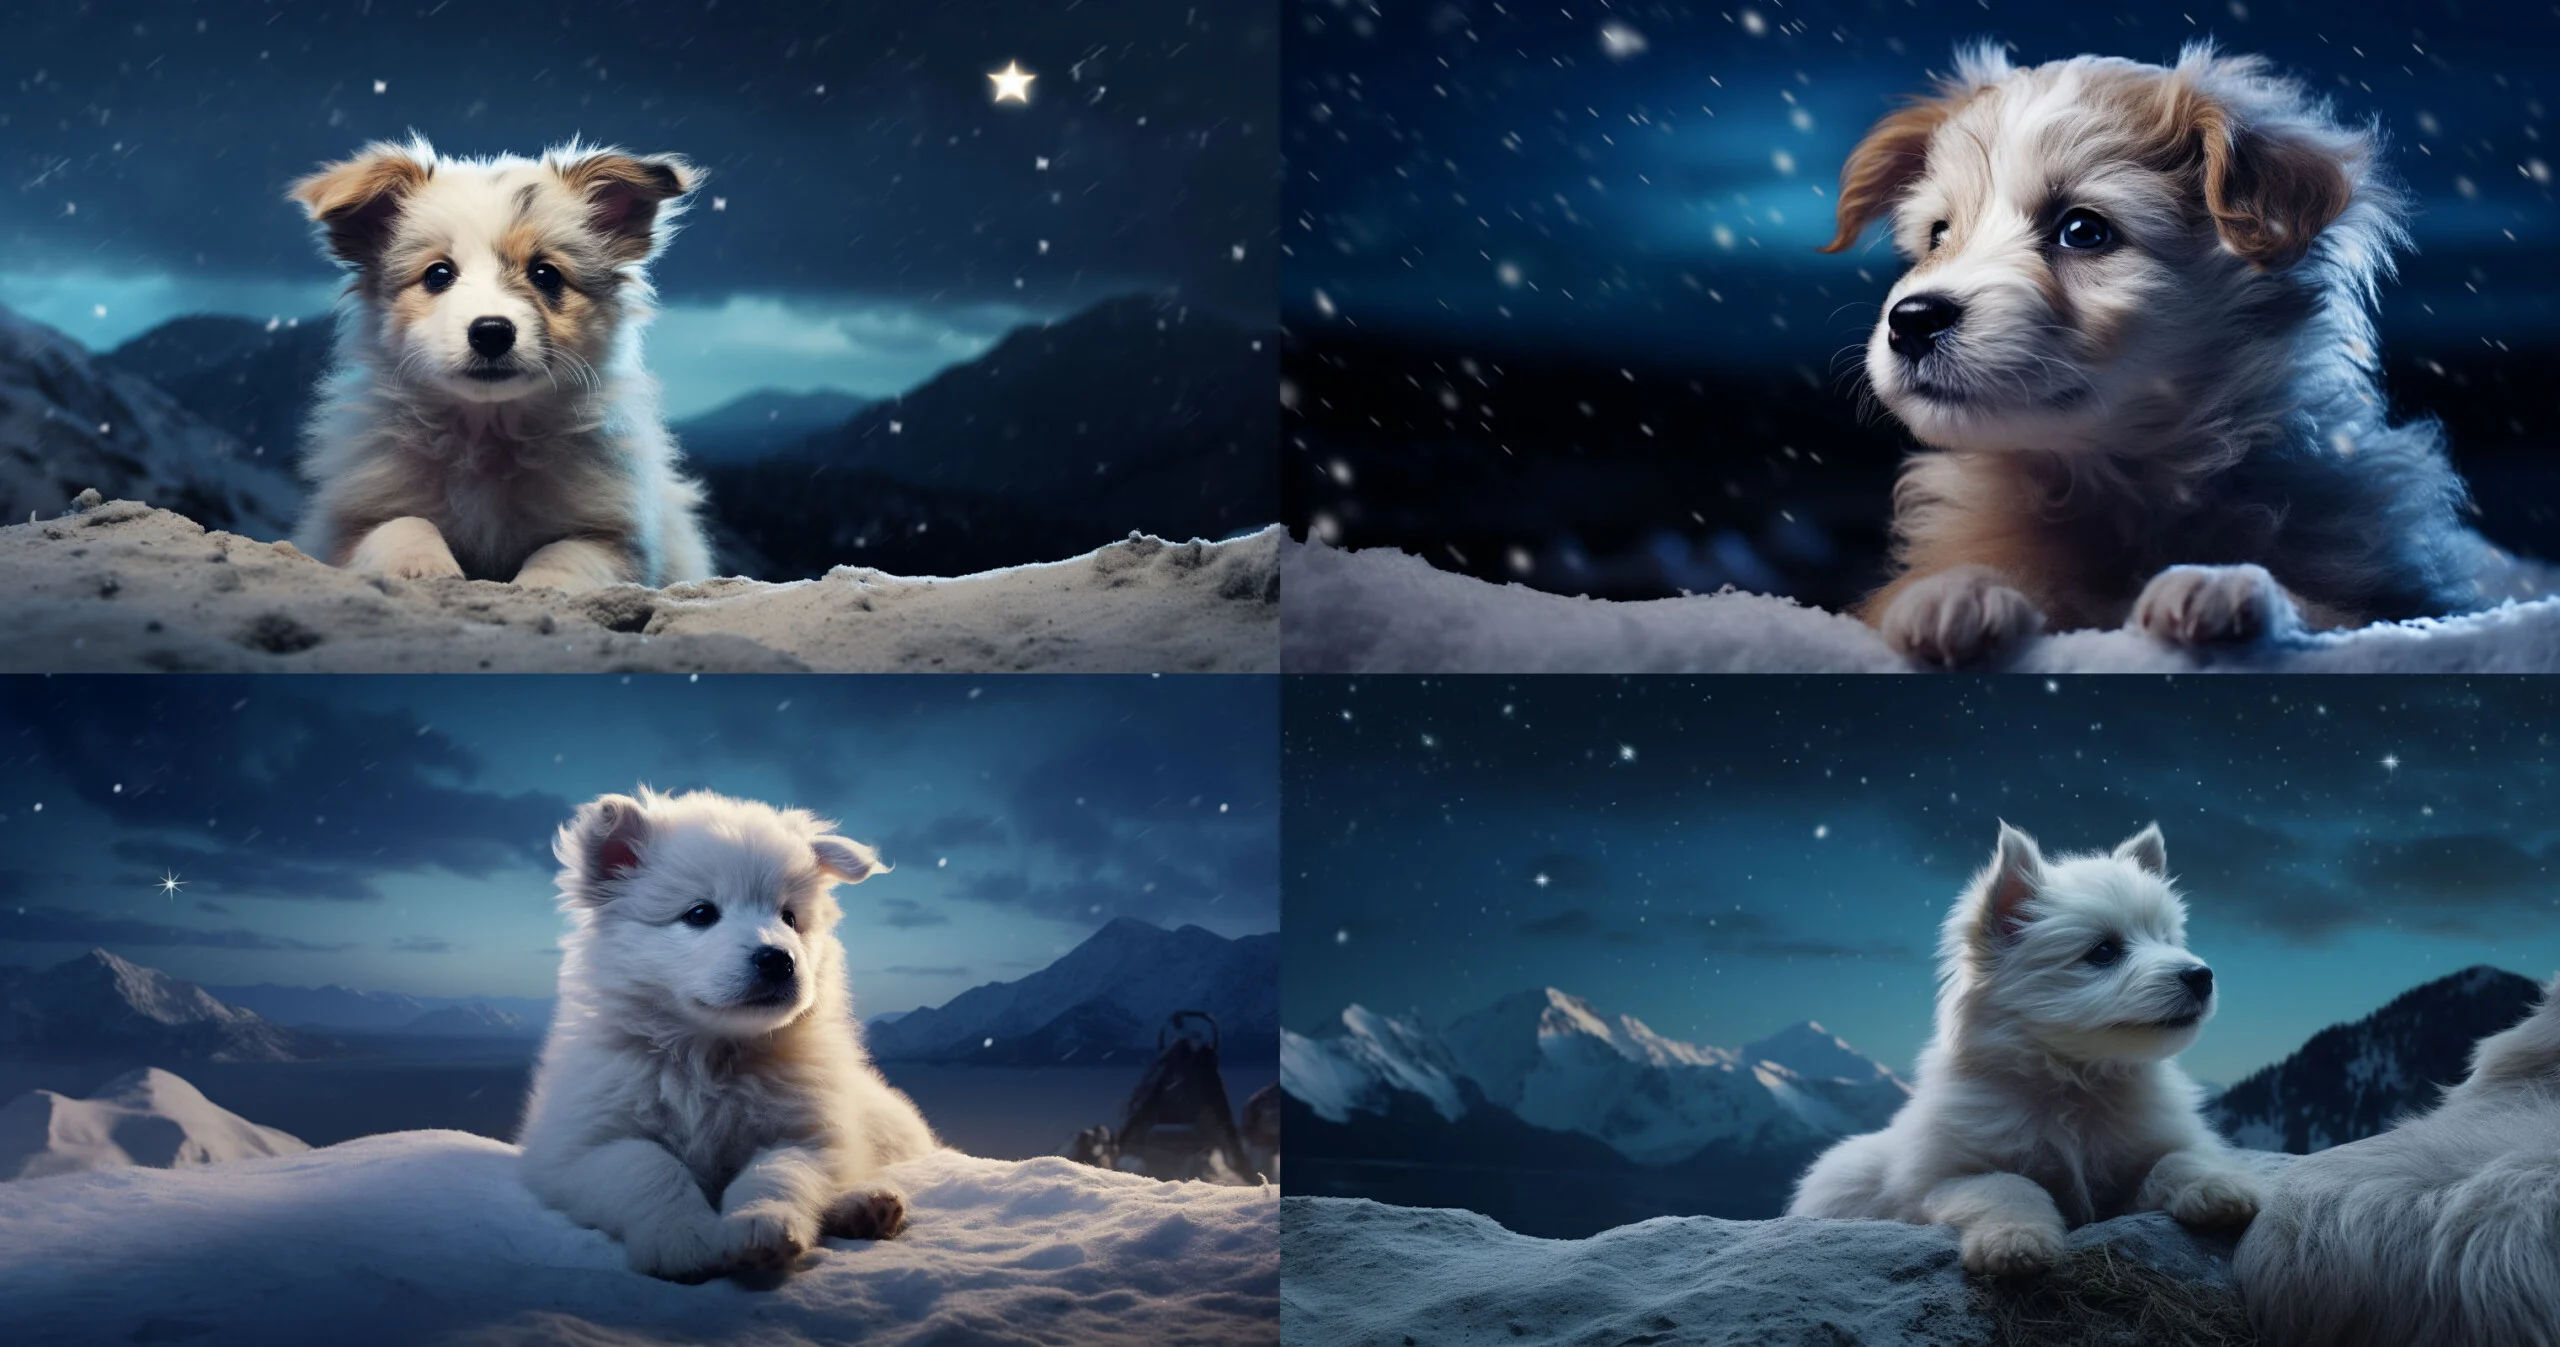 A fluffy puppy playing in the snow on a moonlit night in the mountains